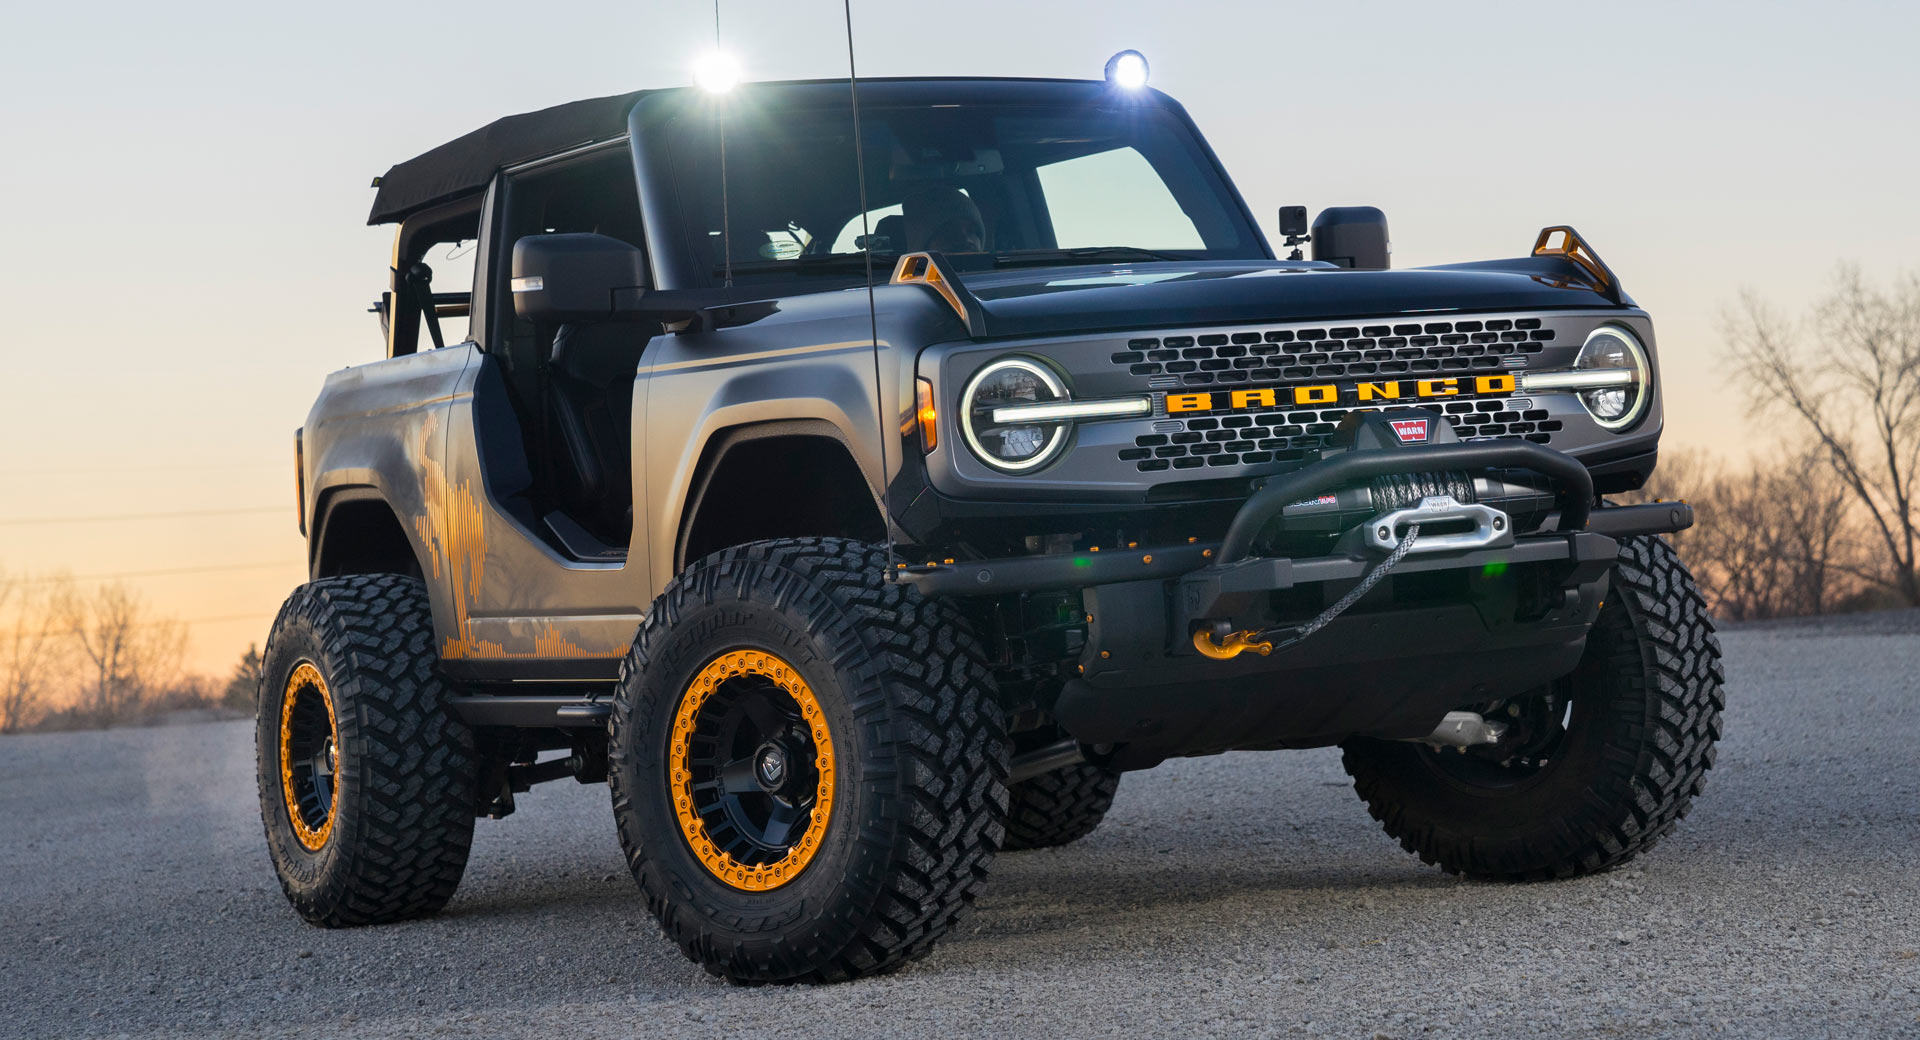 Ford Bronco to offer hundreds of accessories for off-roading